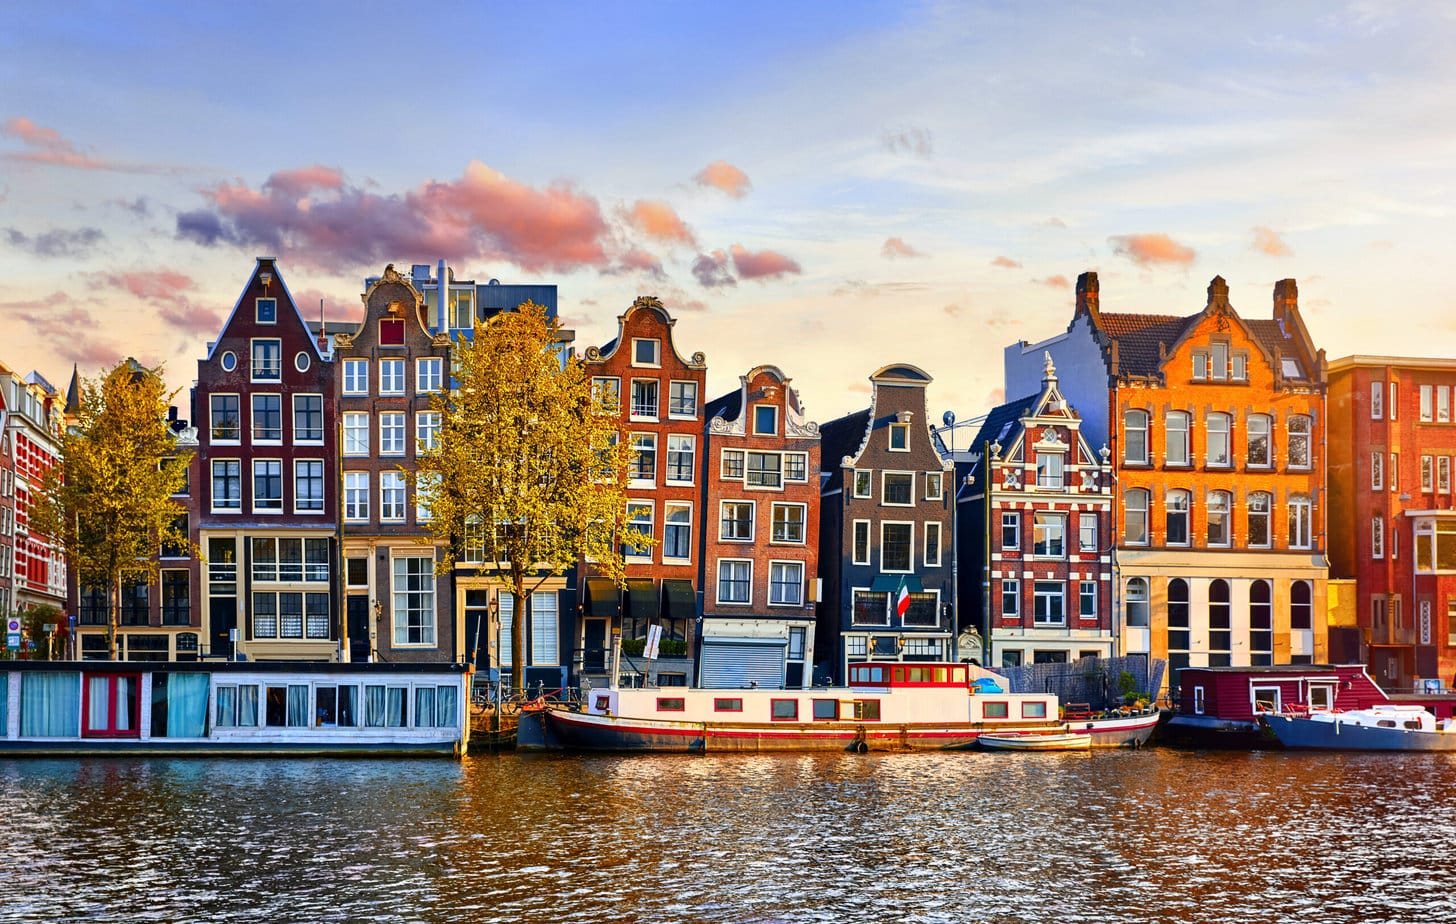 View of terraced townhouses across a river in Amsterdam Netherlands around sunset in spring with a canal boat on the watyer in front. One day in Amsterdam.